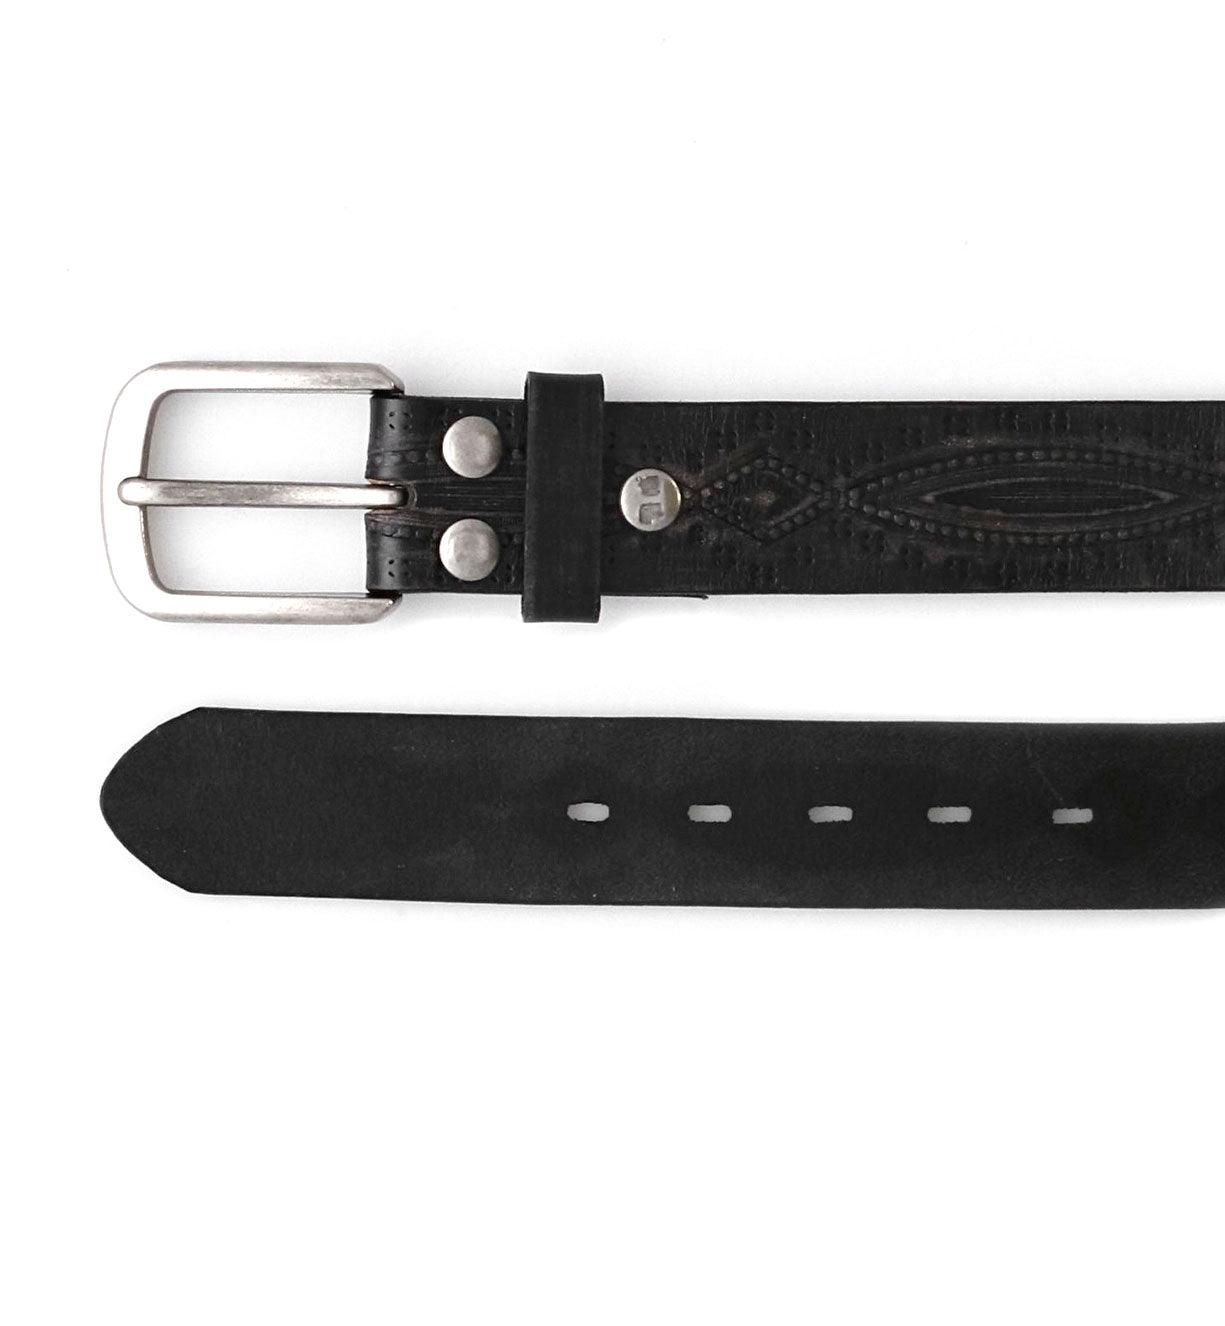 An Arsenal black leather belt with a silver buckle by Bed Stu.